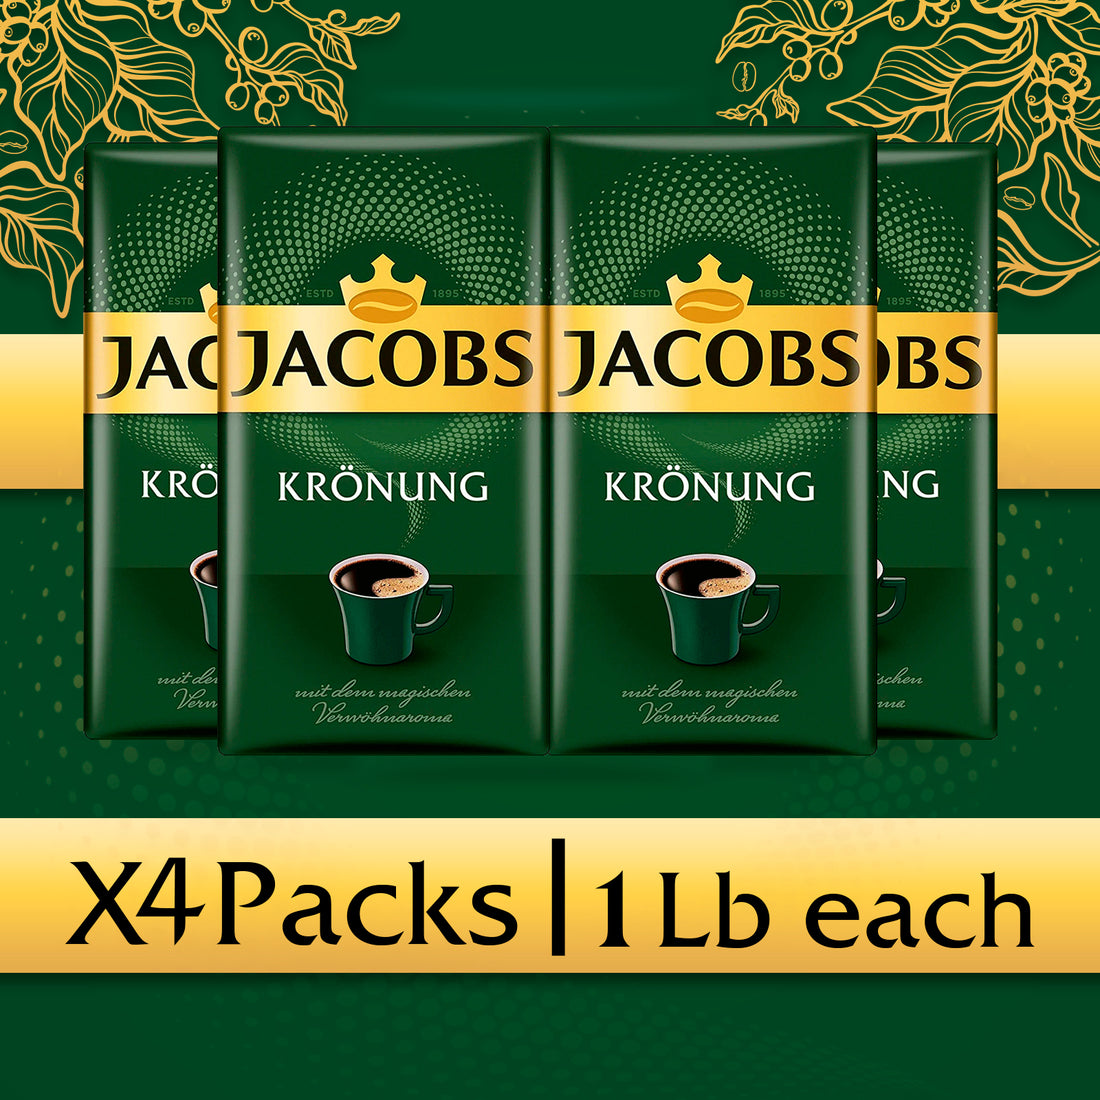 Jacobs Kronung 500g (4-Pack), Ground Coffee - Total 2 kg / 4.4 LB